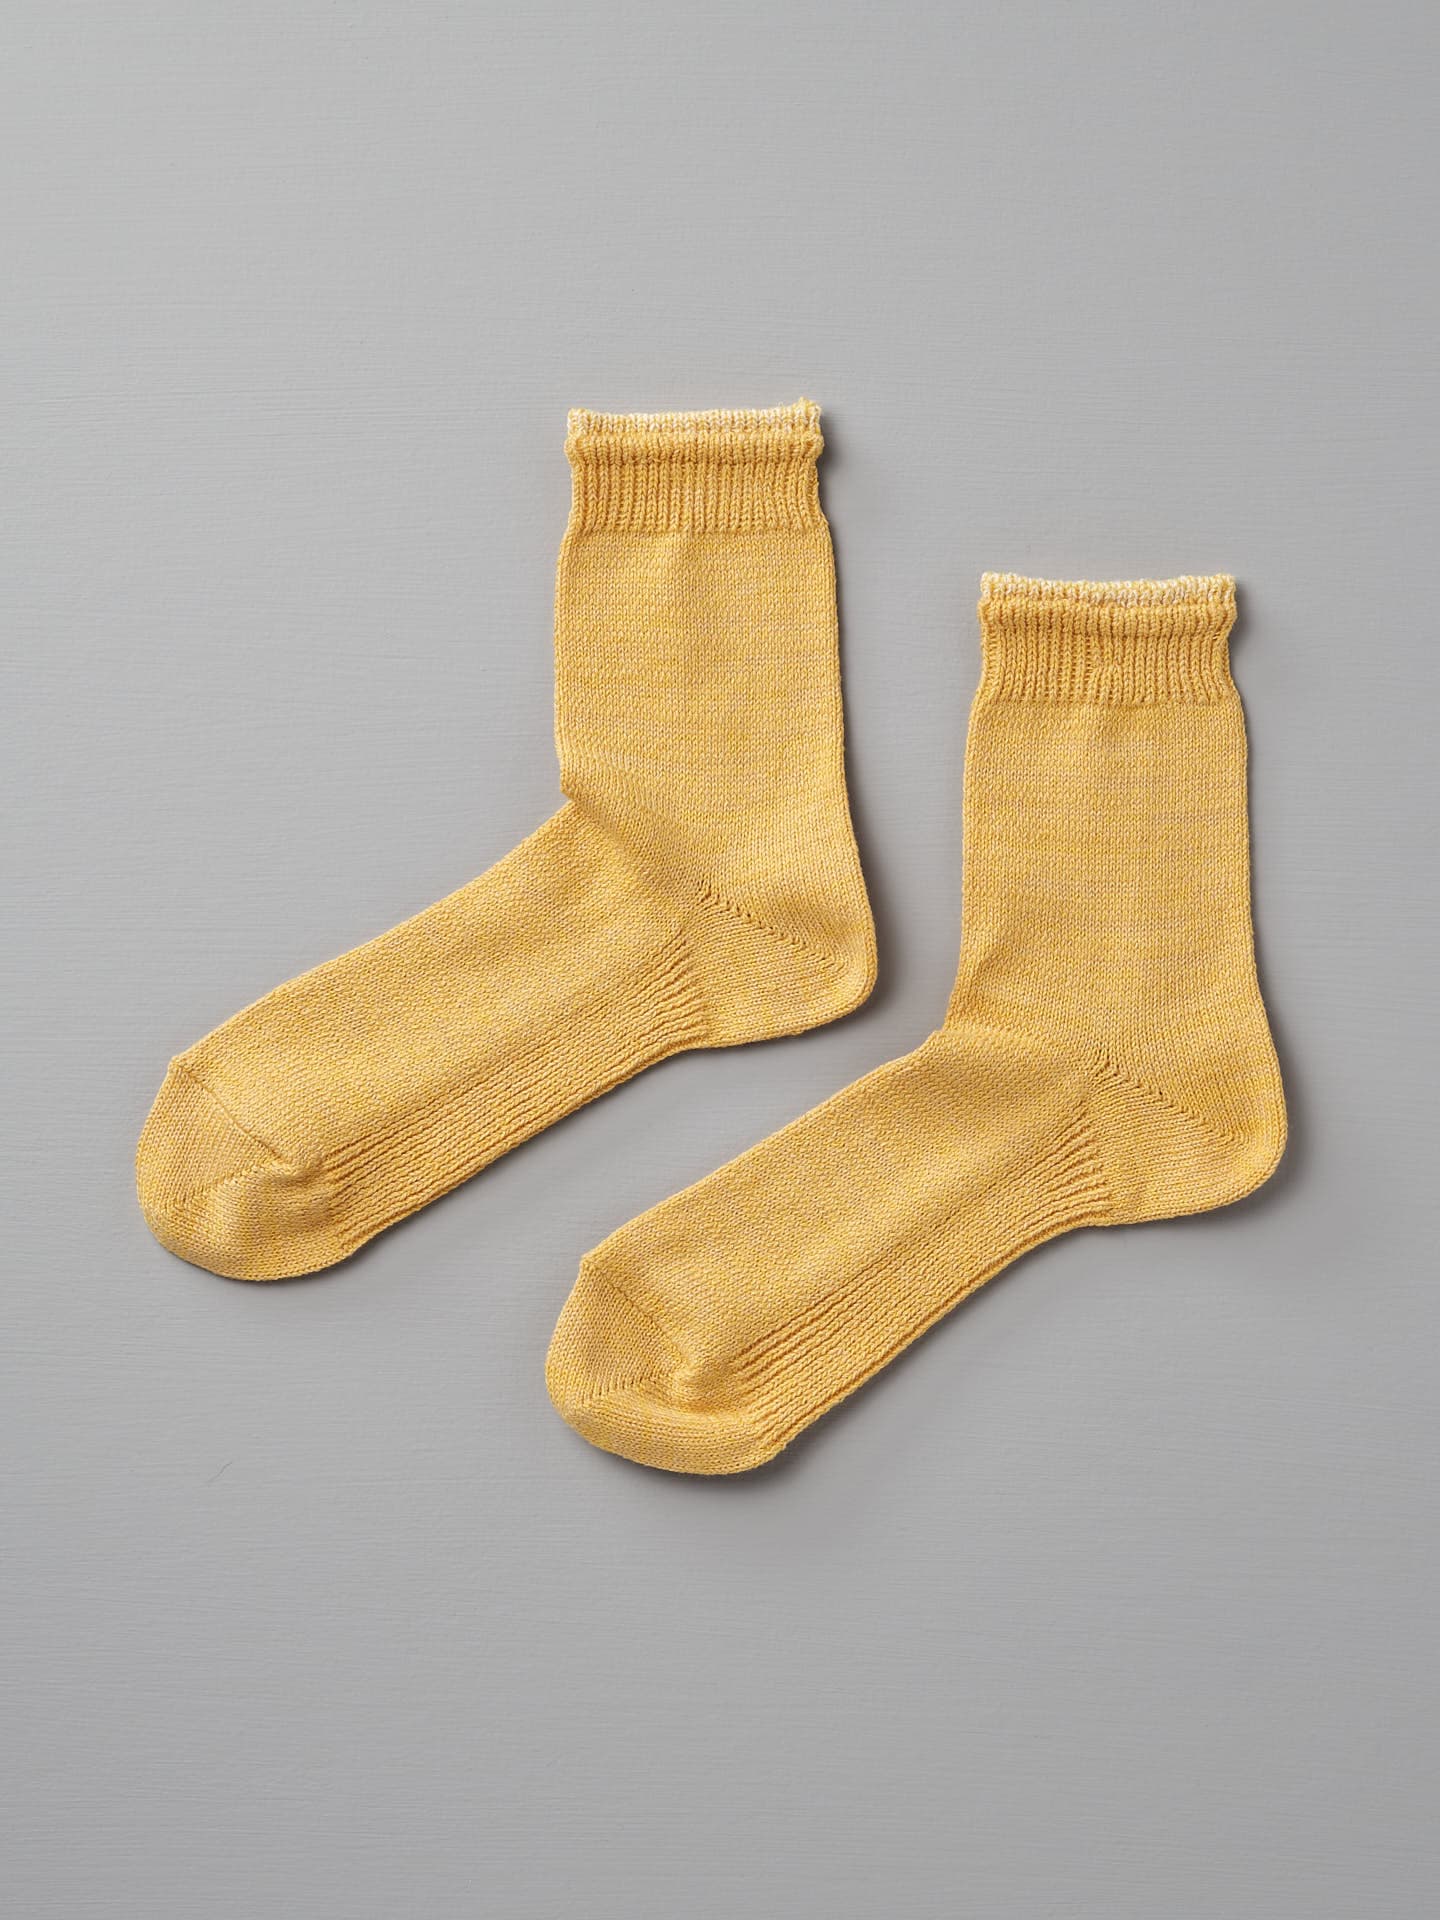 A pair of Mauna Kea Organic Top Switching Socks – Yellow, available in EUR 35—38 and EUR 39—42, is displayed on a grey background.